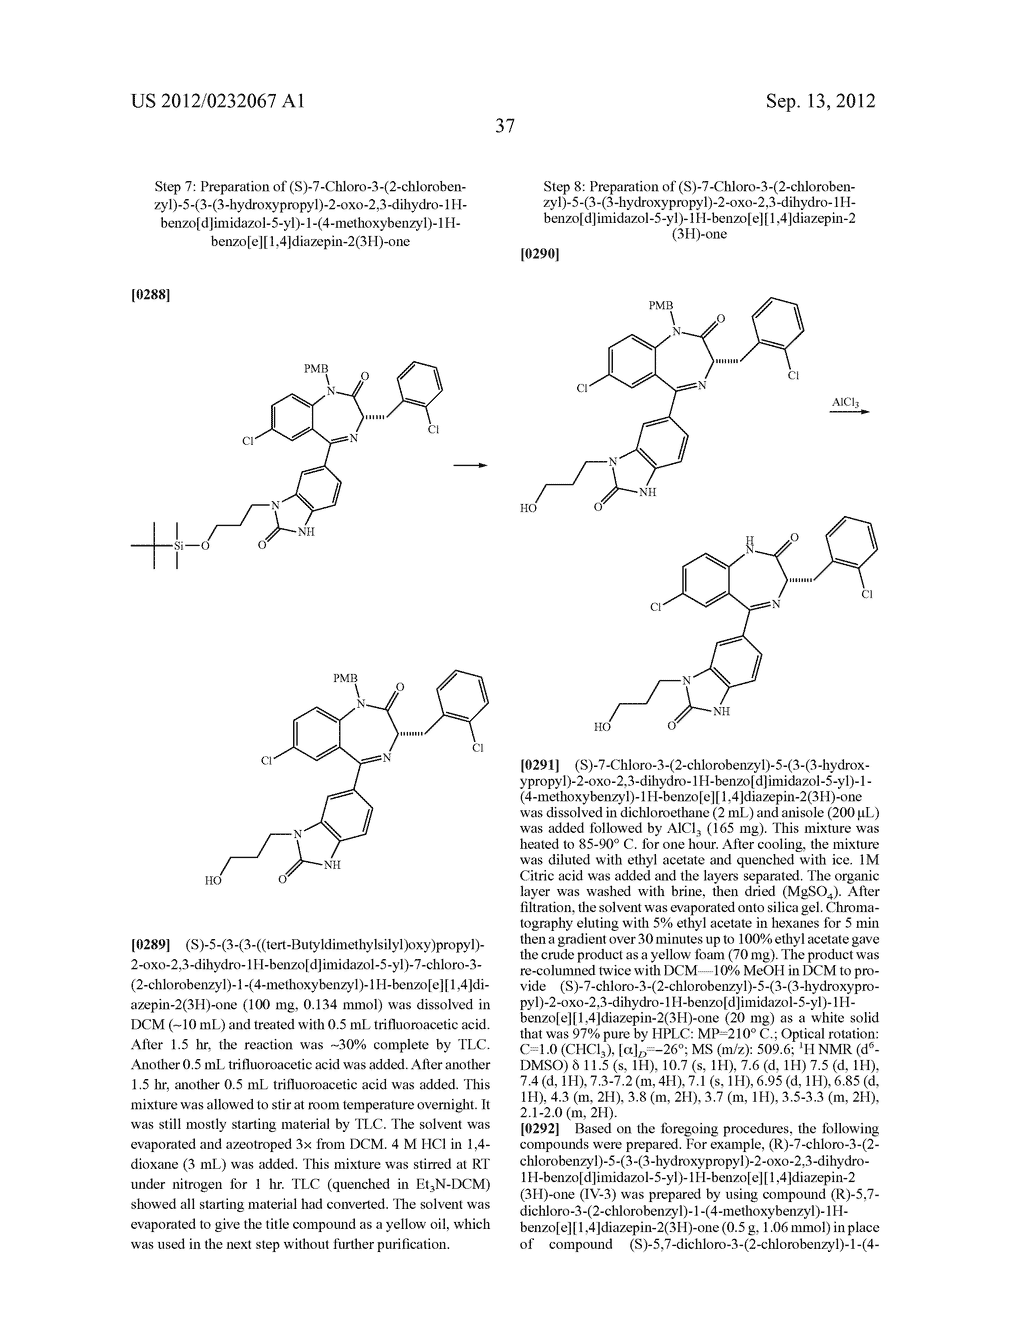 BENZODIAZEPINONE COMPOUNDS AND METHODS OF TREATMENT USING SAME - diagram, schematic, and image 38